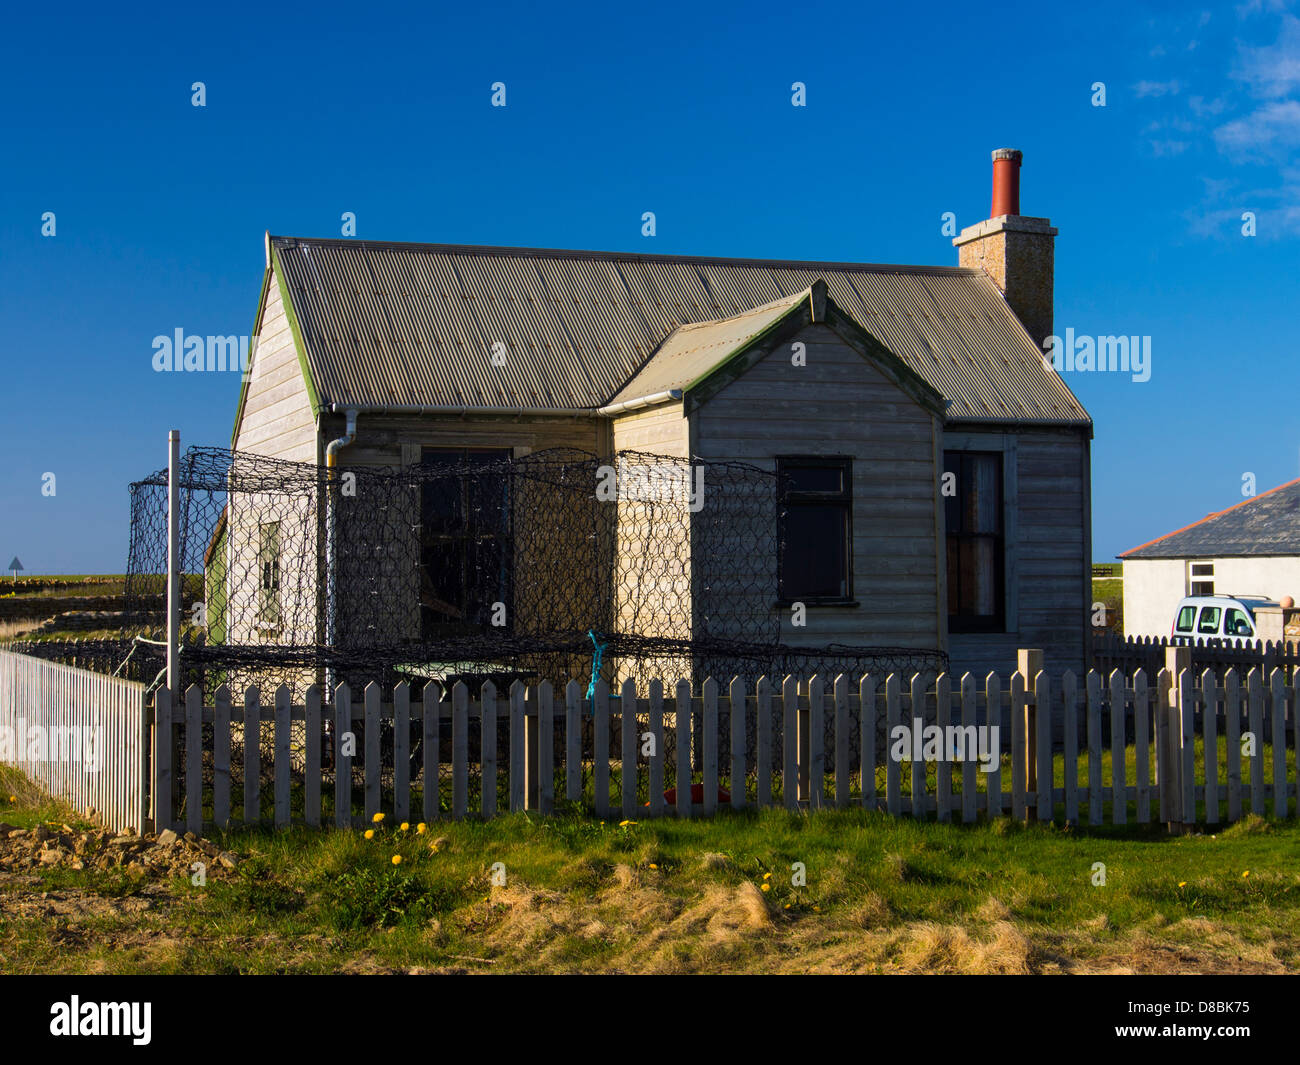 Scotland, Orkney Islands, Mainland Orkney. House in Birsay parish, a small settlement on the west coast of mainland Orkney. Stock Photo